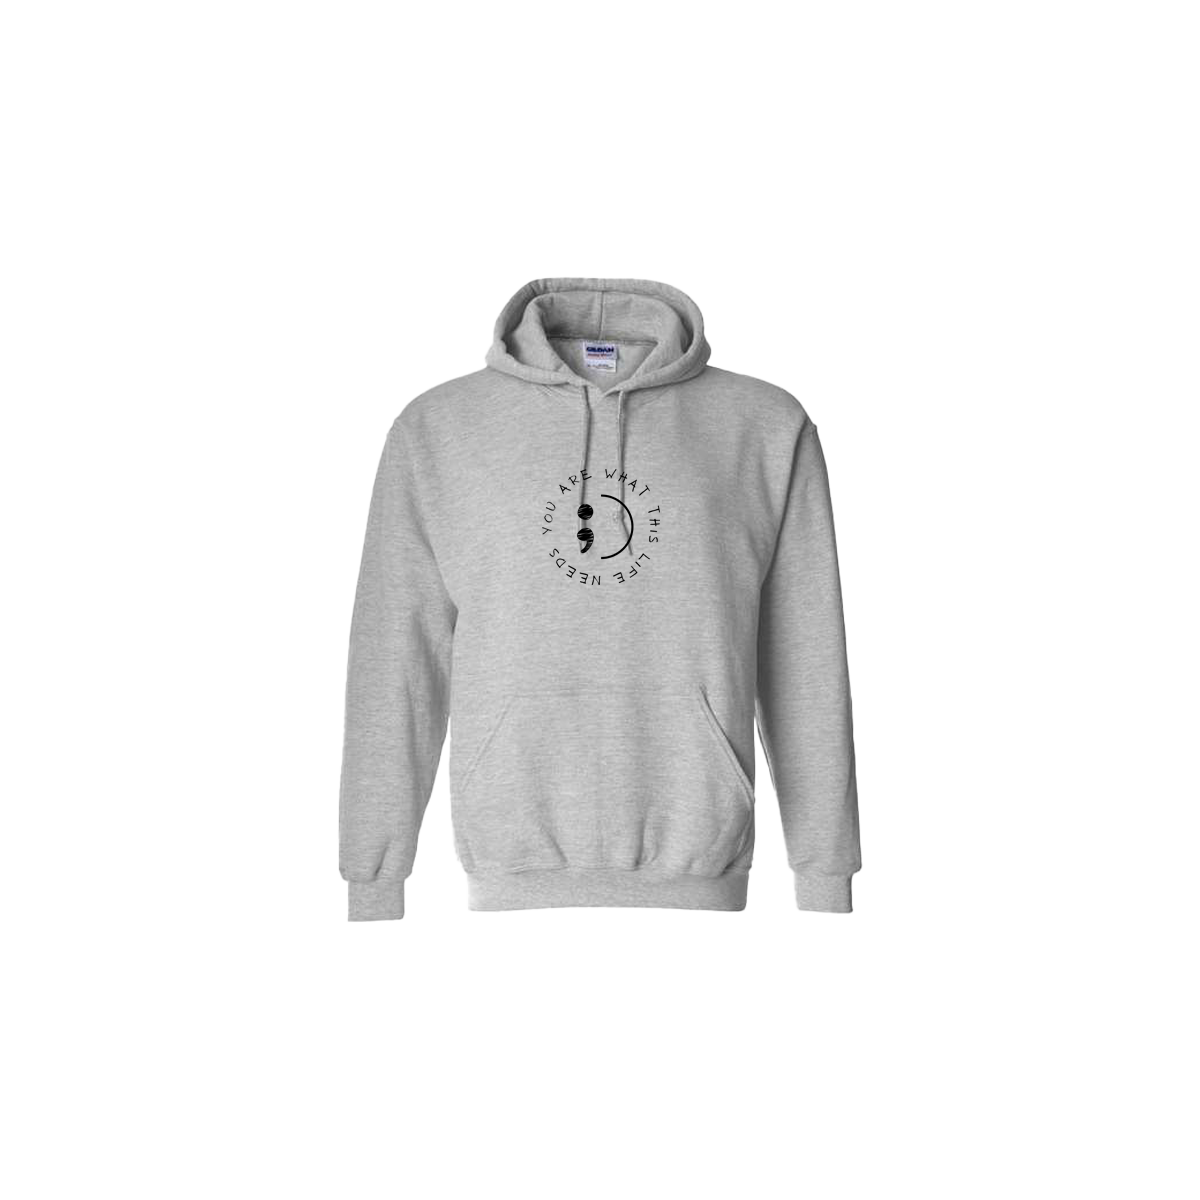 You Are What This Life Needs Embroidered Grey Hoodie - Mental Health Awareness Clothing